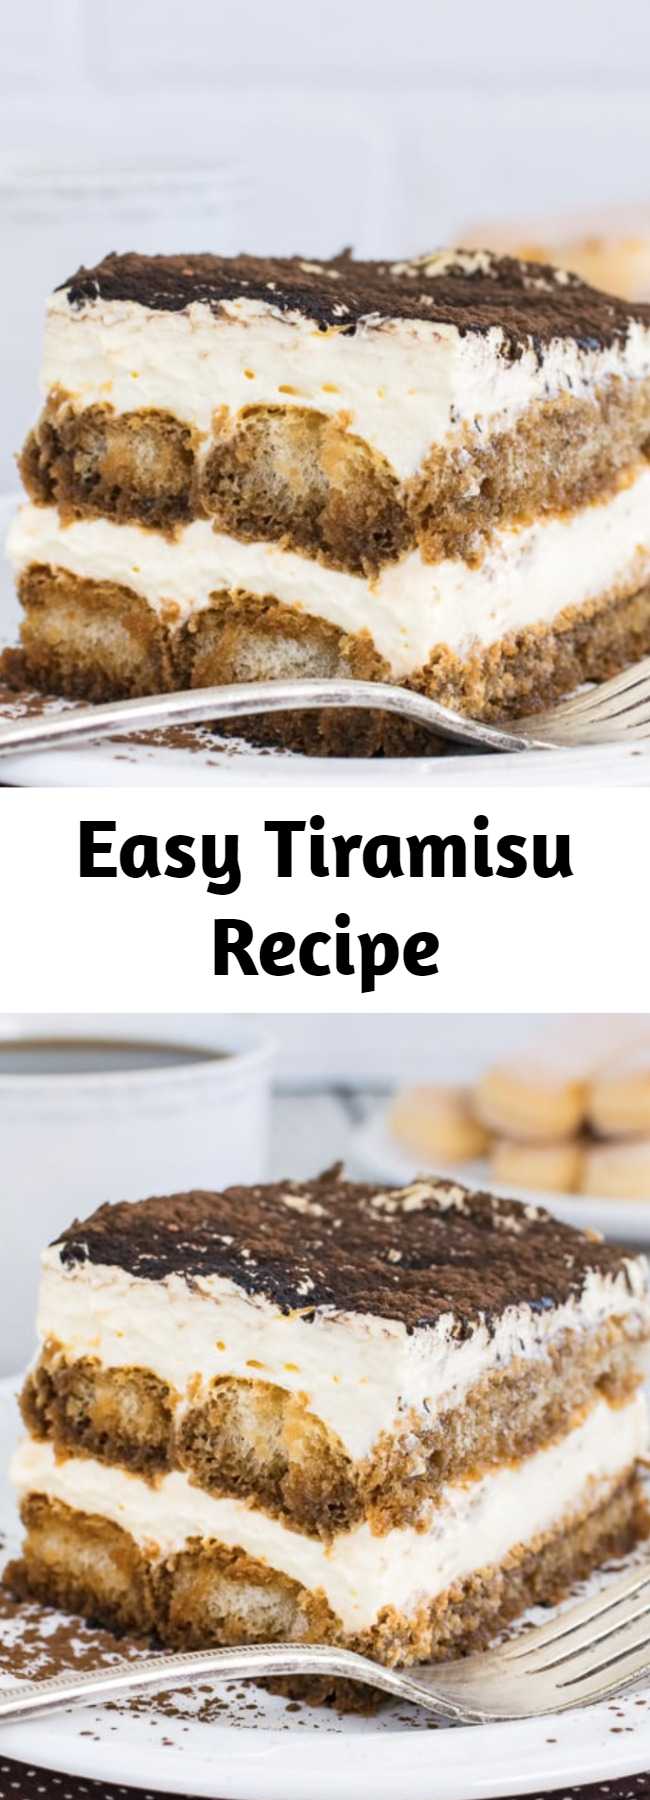 Easy Tiramisu Recipe - The creamy cheesecake and coffee soaked cookie layers in this Easy Tiramisu will have everyone coming back for another slice. Great dessert to share at any dinner.